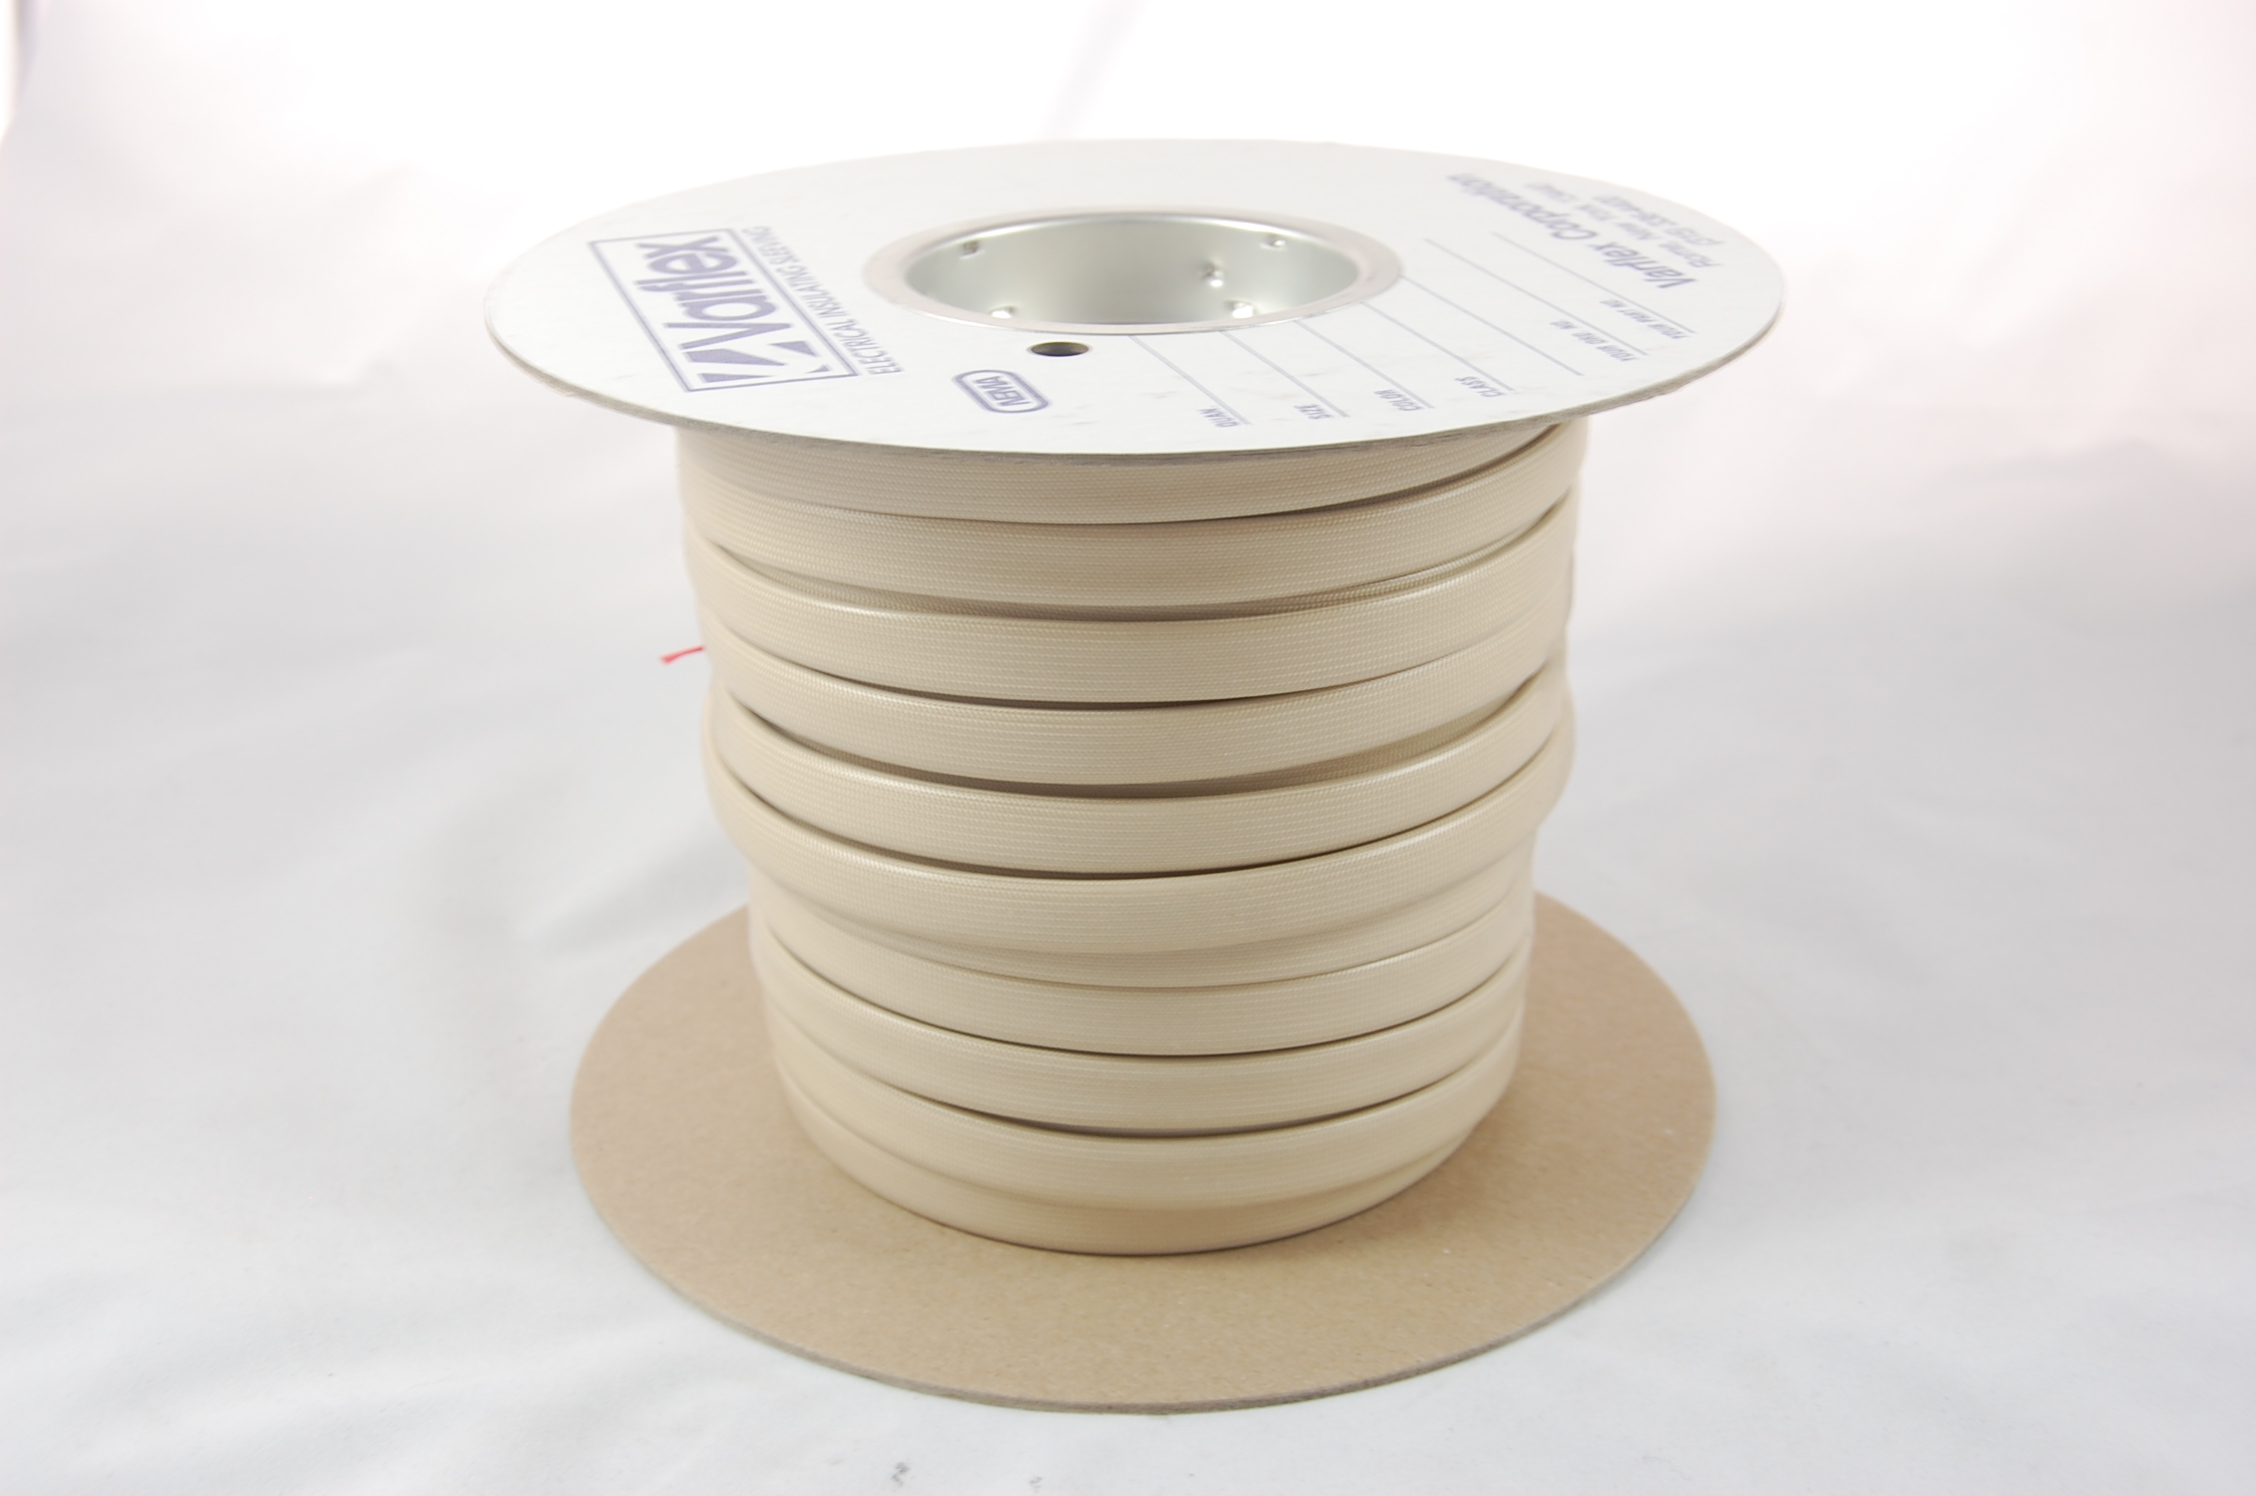 #3 AWG Varglas Silicone Rubber Grade H-C-1 (2500V) High Temperature Silicone Rubber Coated Braided Fiberglass Sleeving 200°C, natural, 150 FT per spool